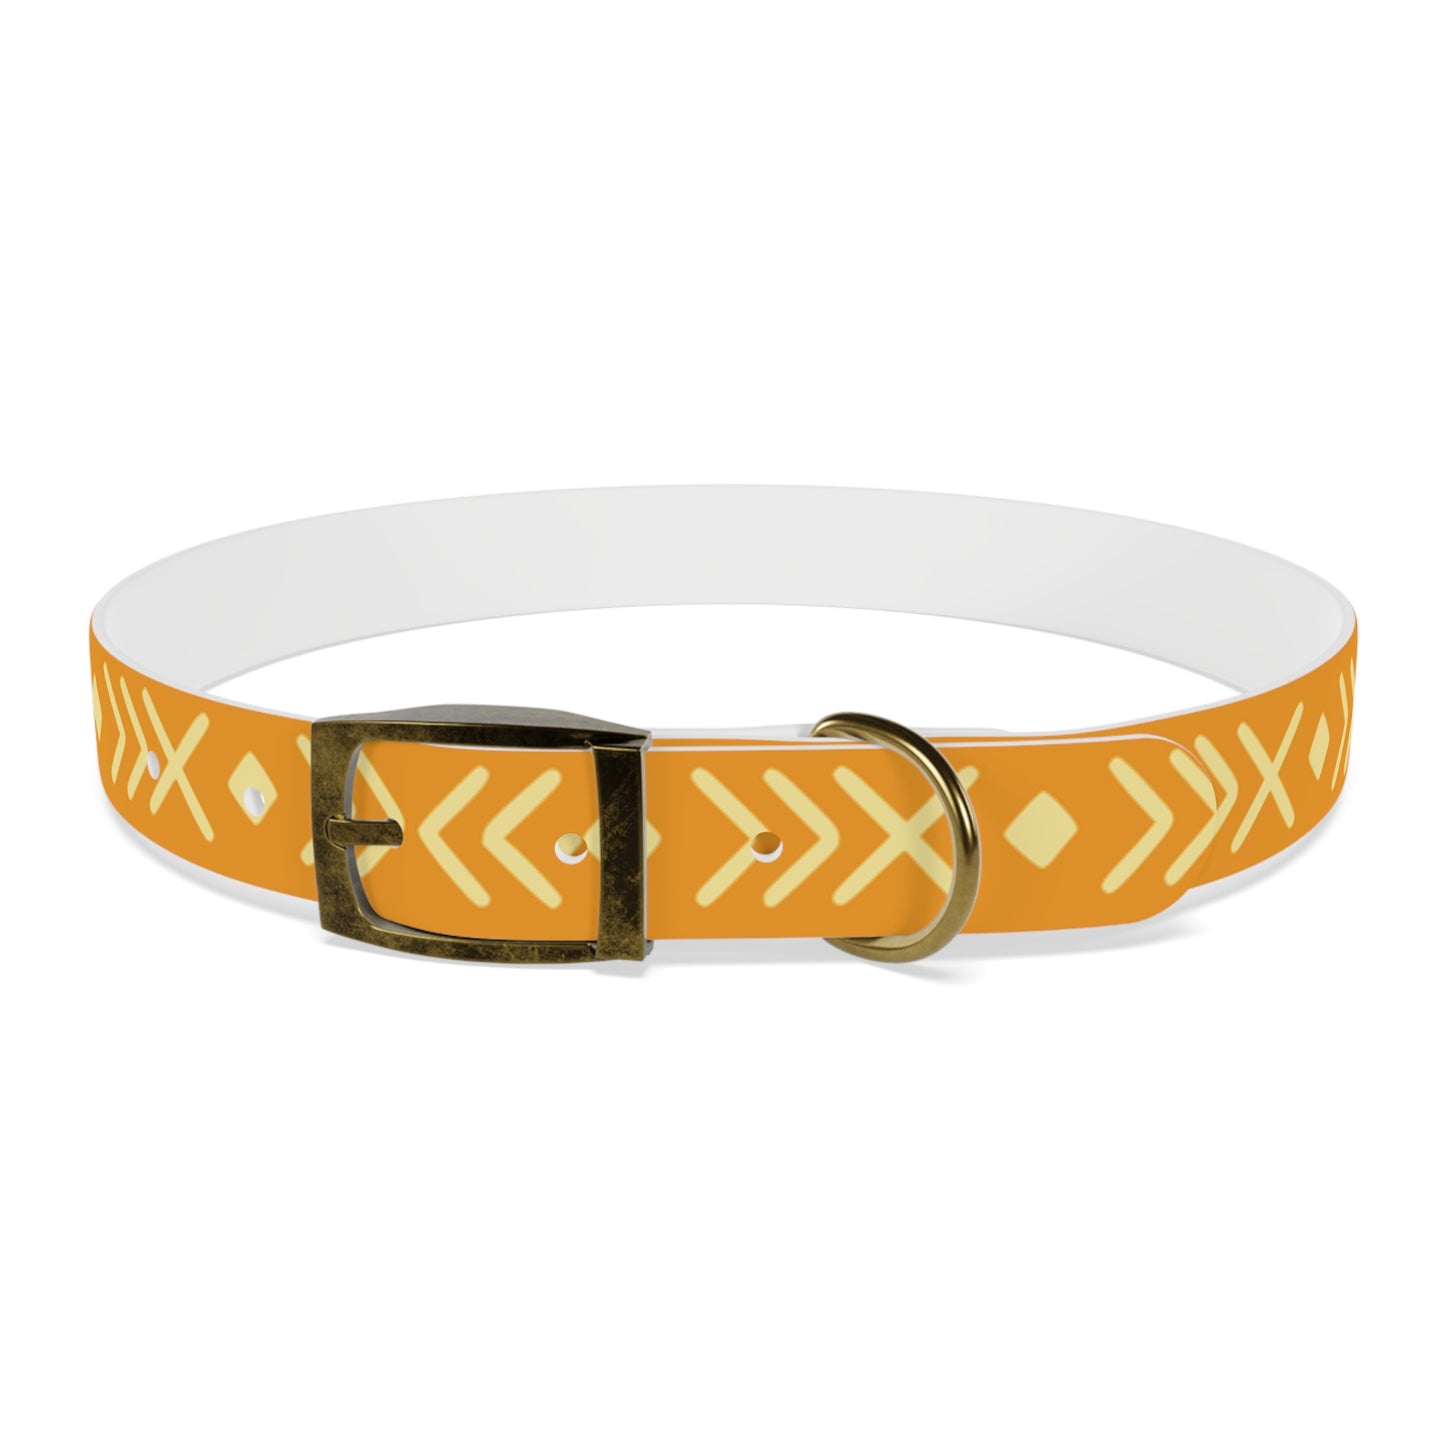 Southwest Chic Dog Collar -Choose Color and Buckle Finish